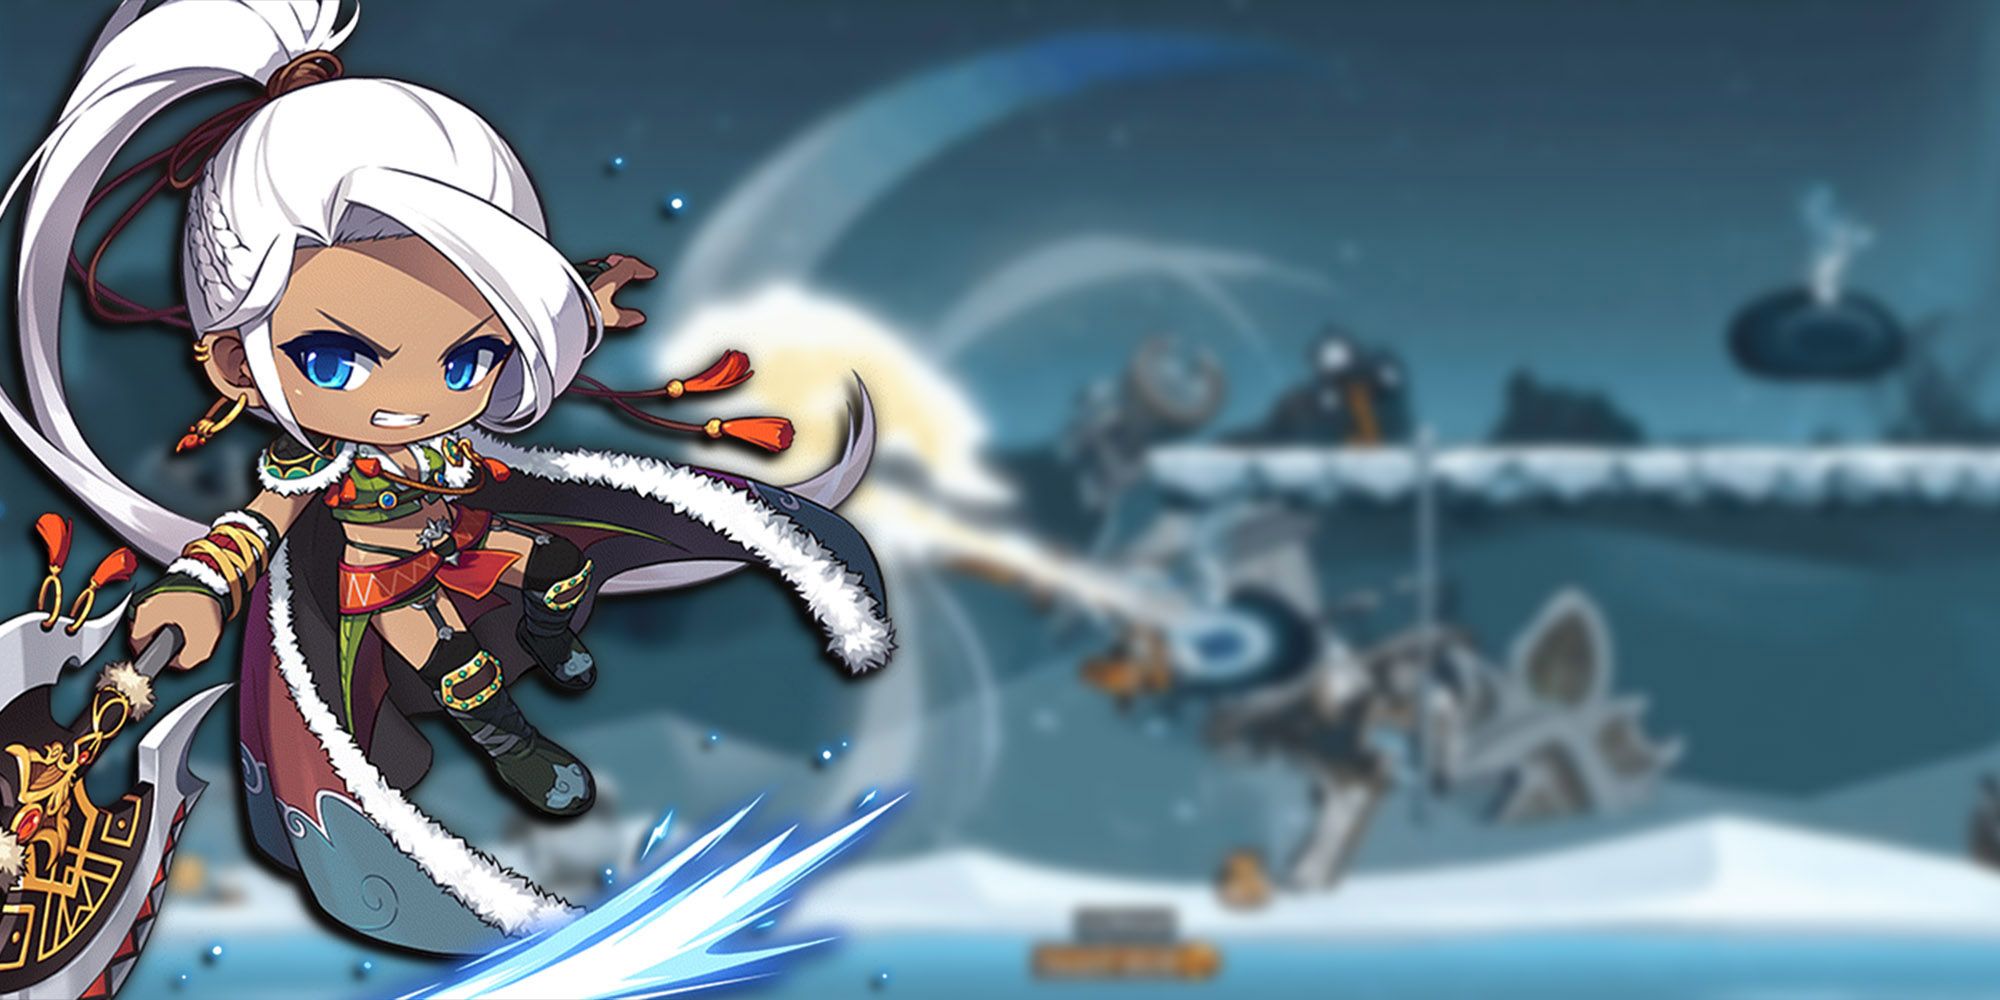 Maplestory - Aran Using Maha's Carnage Skill With PNG Of Aran On Top